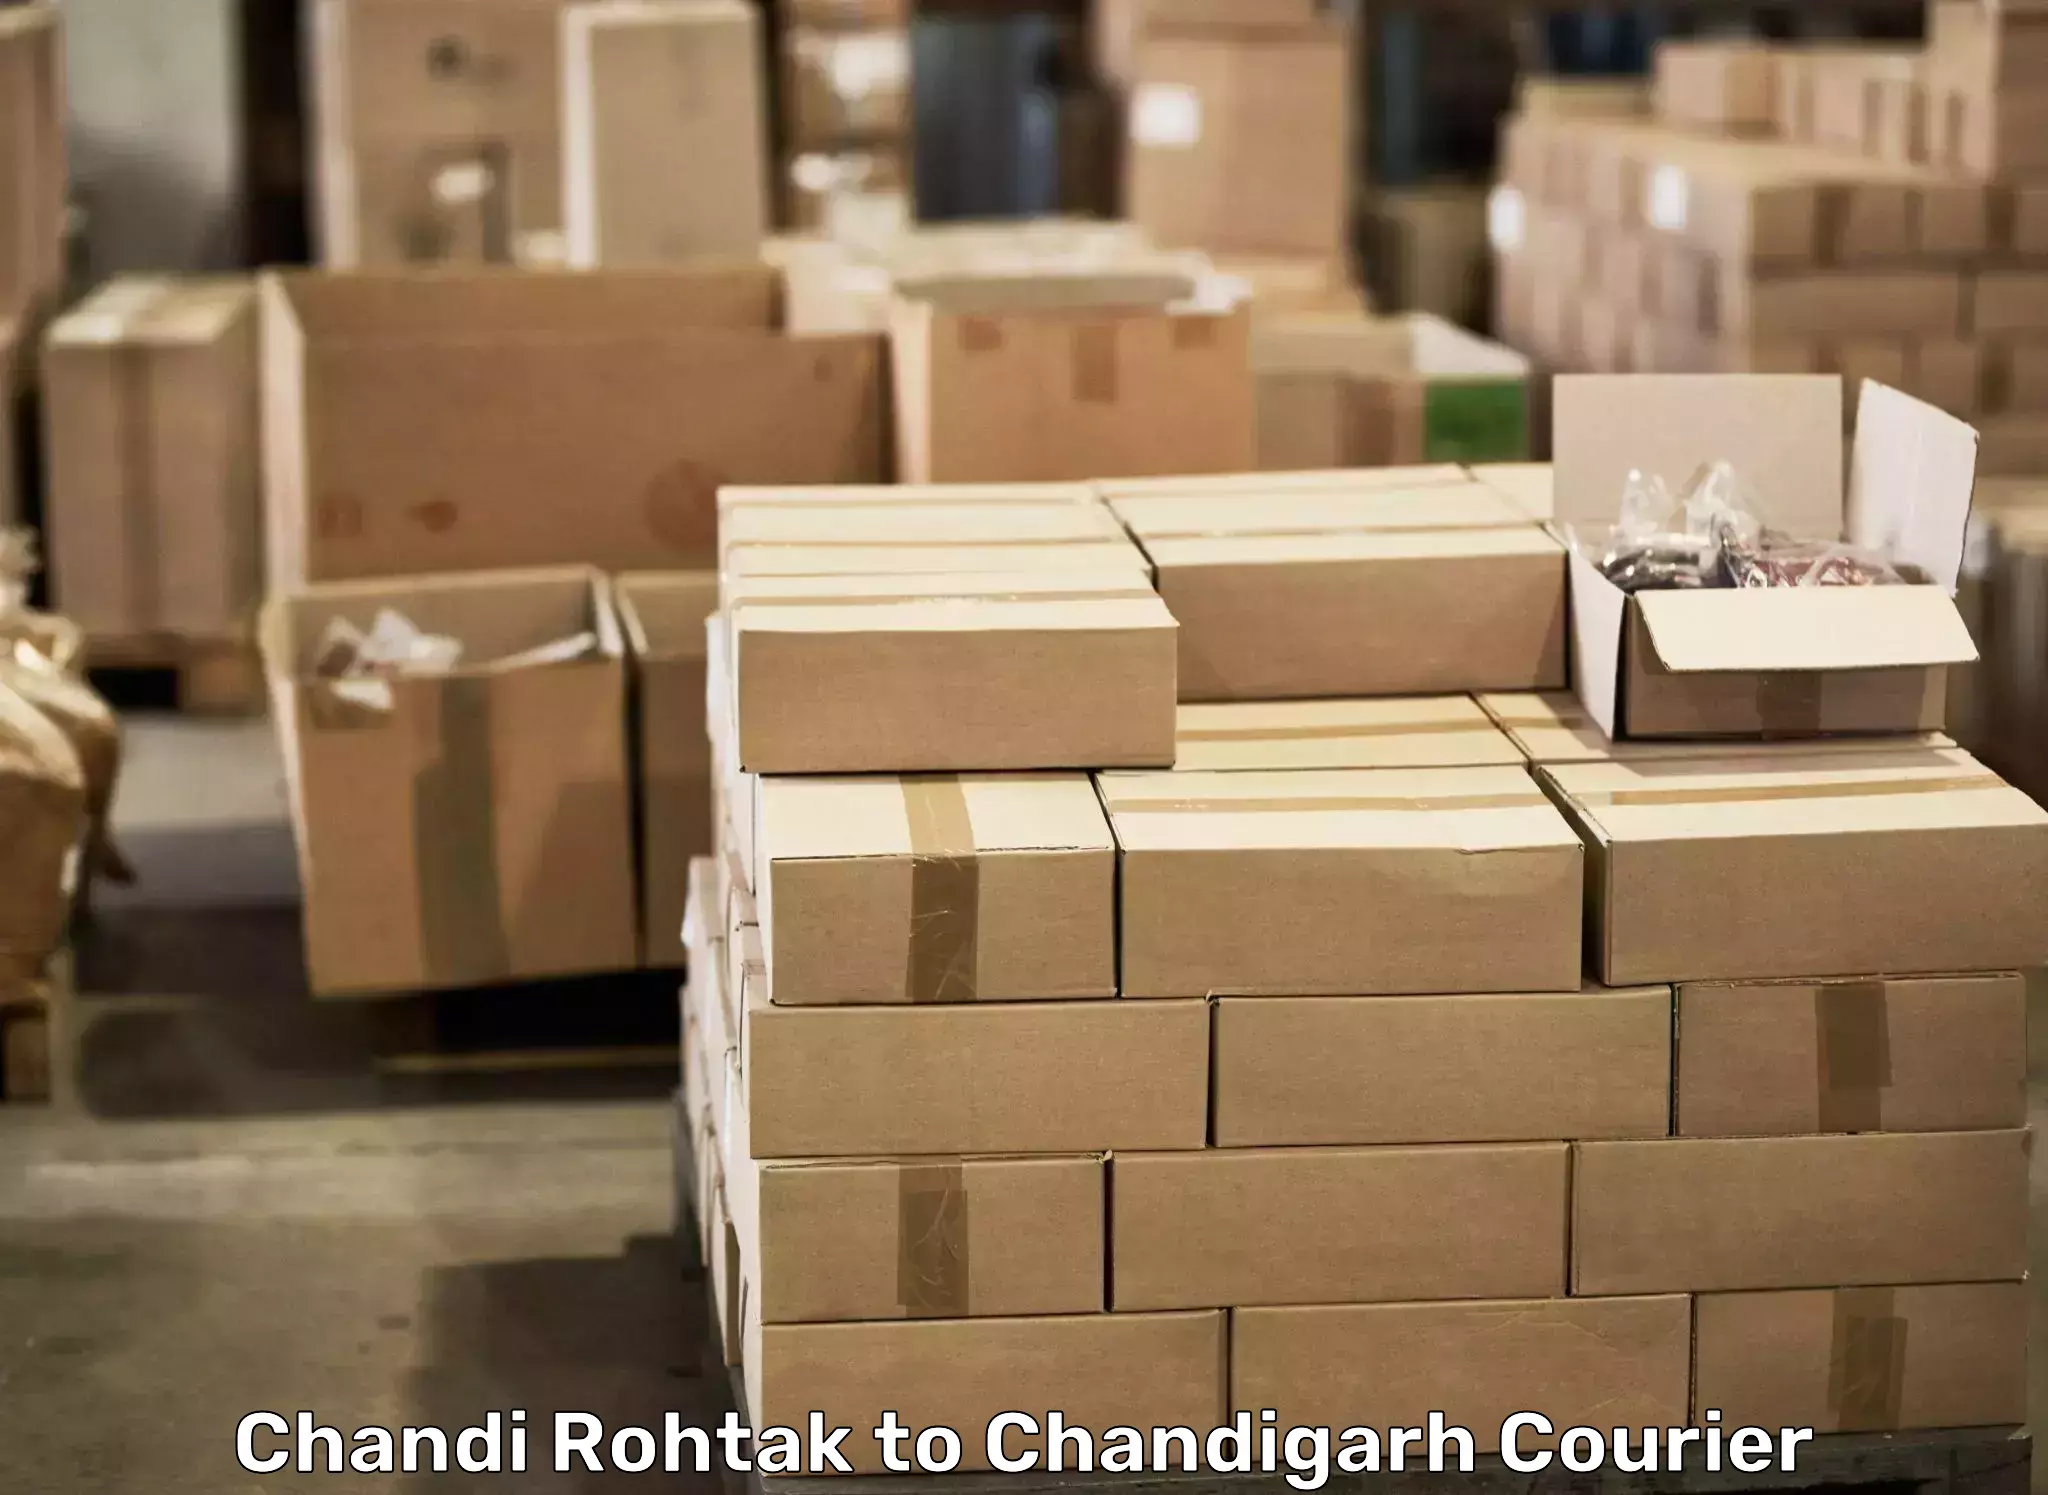 Trusted relocation experts Chandi Rohtak to Chandigarh